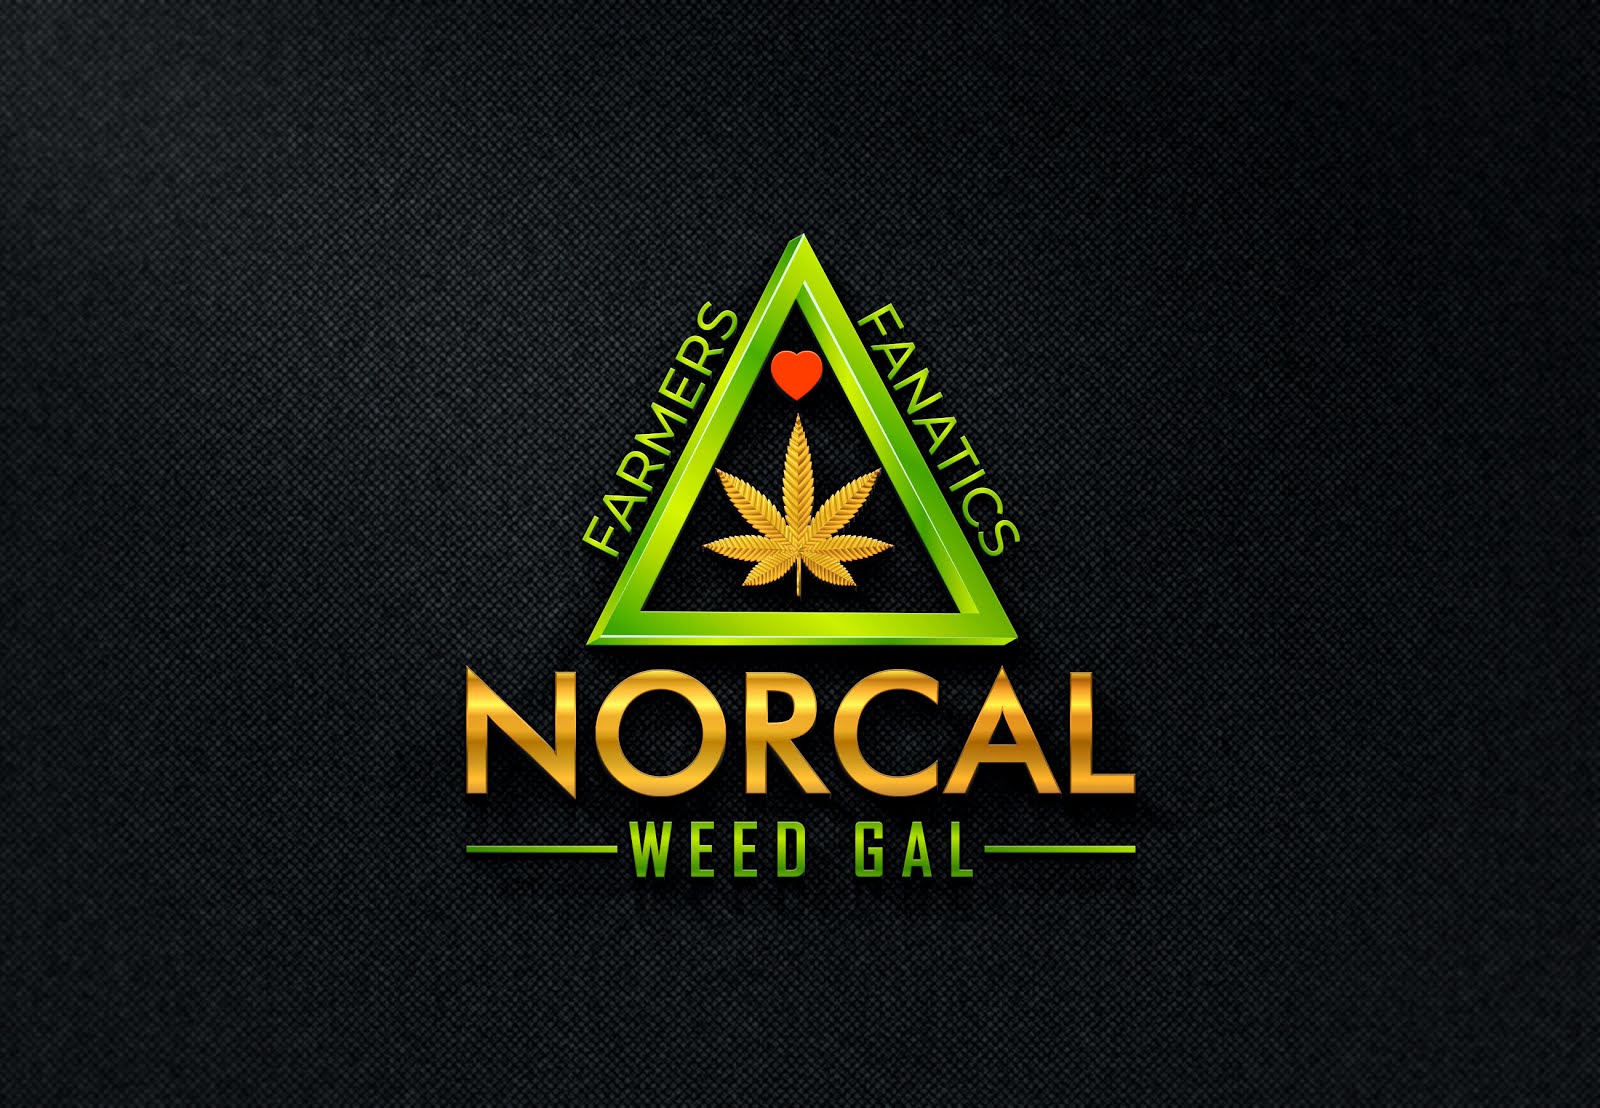 NorCal Weed Gal